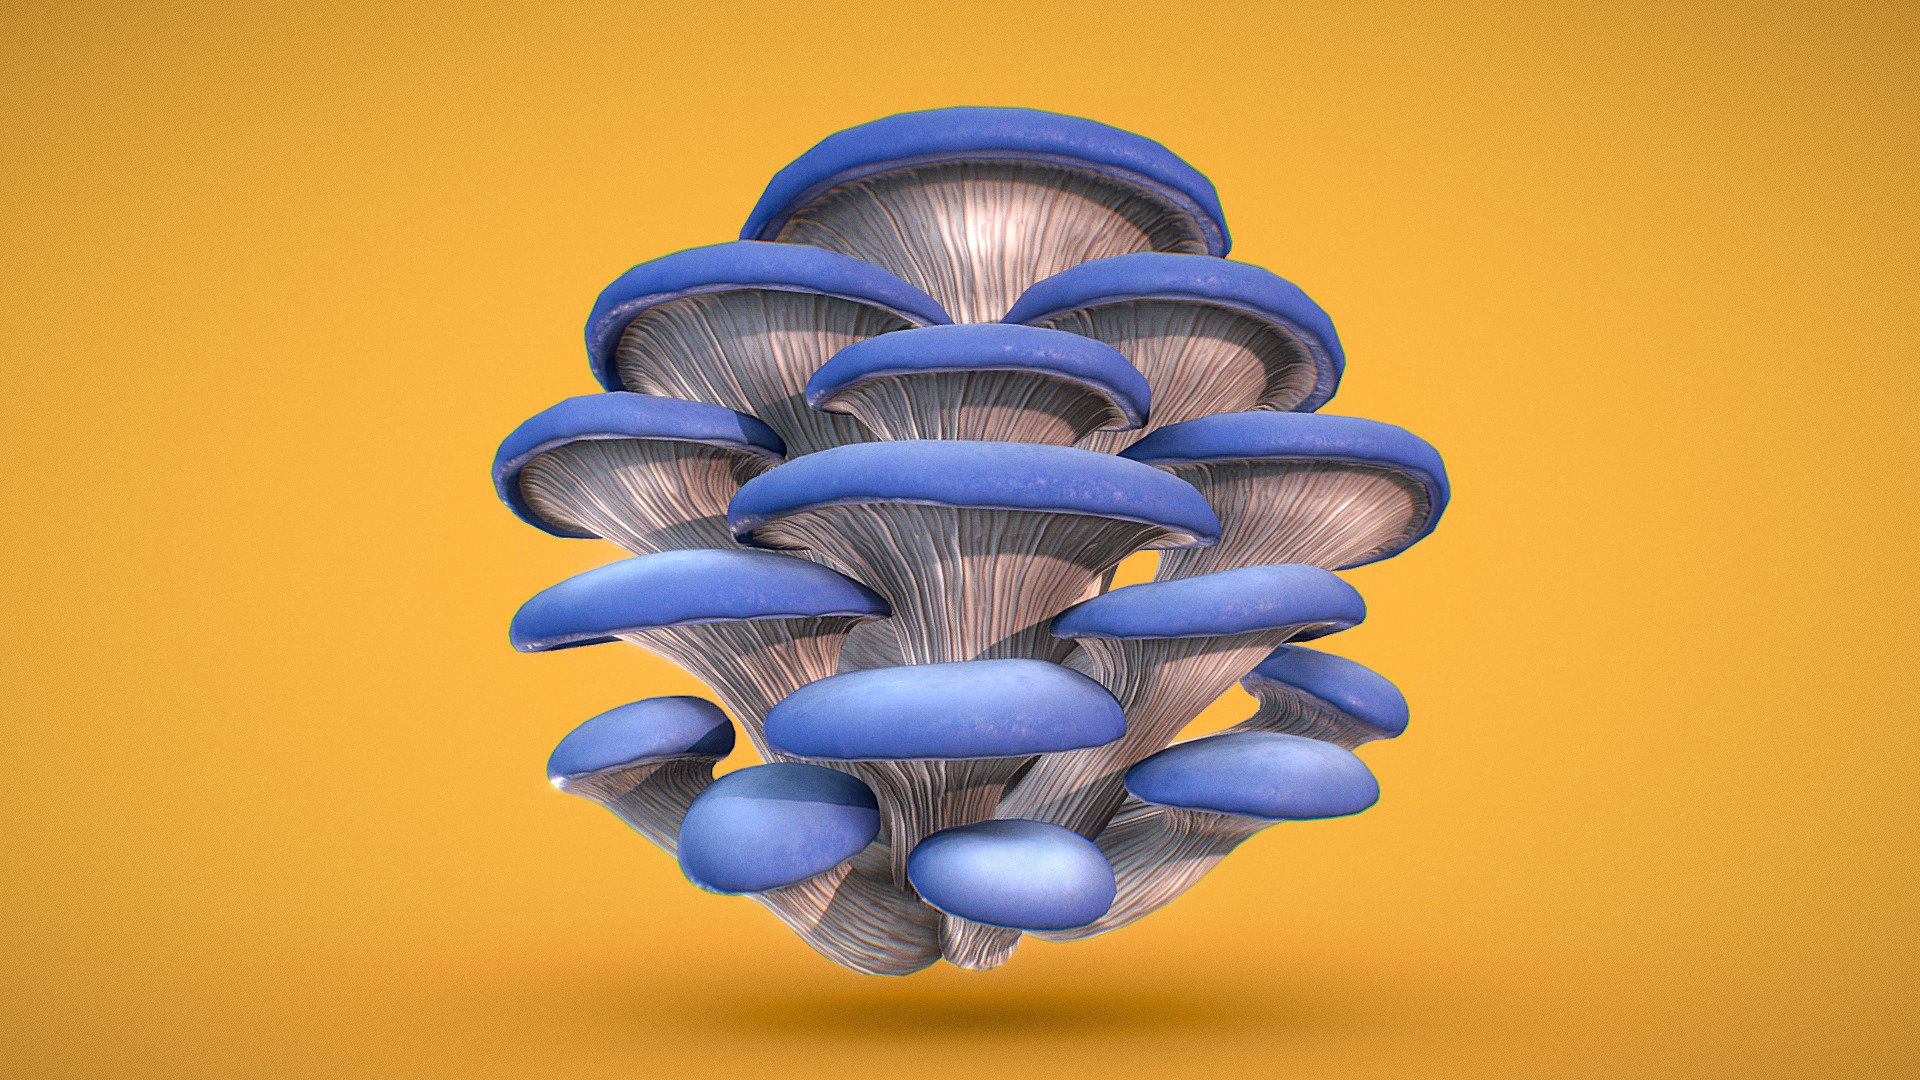 Blue Oyster mushroom, sculpted in Zbrush and textured in Painter.

Blue Oyster Mushroom (Pleurotus ostreatus var. Columbinus) 
A species of pearl oyster mushroom that grows in the Northern Hemisphere during the Spring and Autumn seasons. It is an edible and nutrient dense mushroom with no psychoactive effects when consumed 3d model